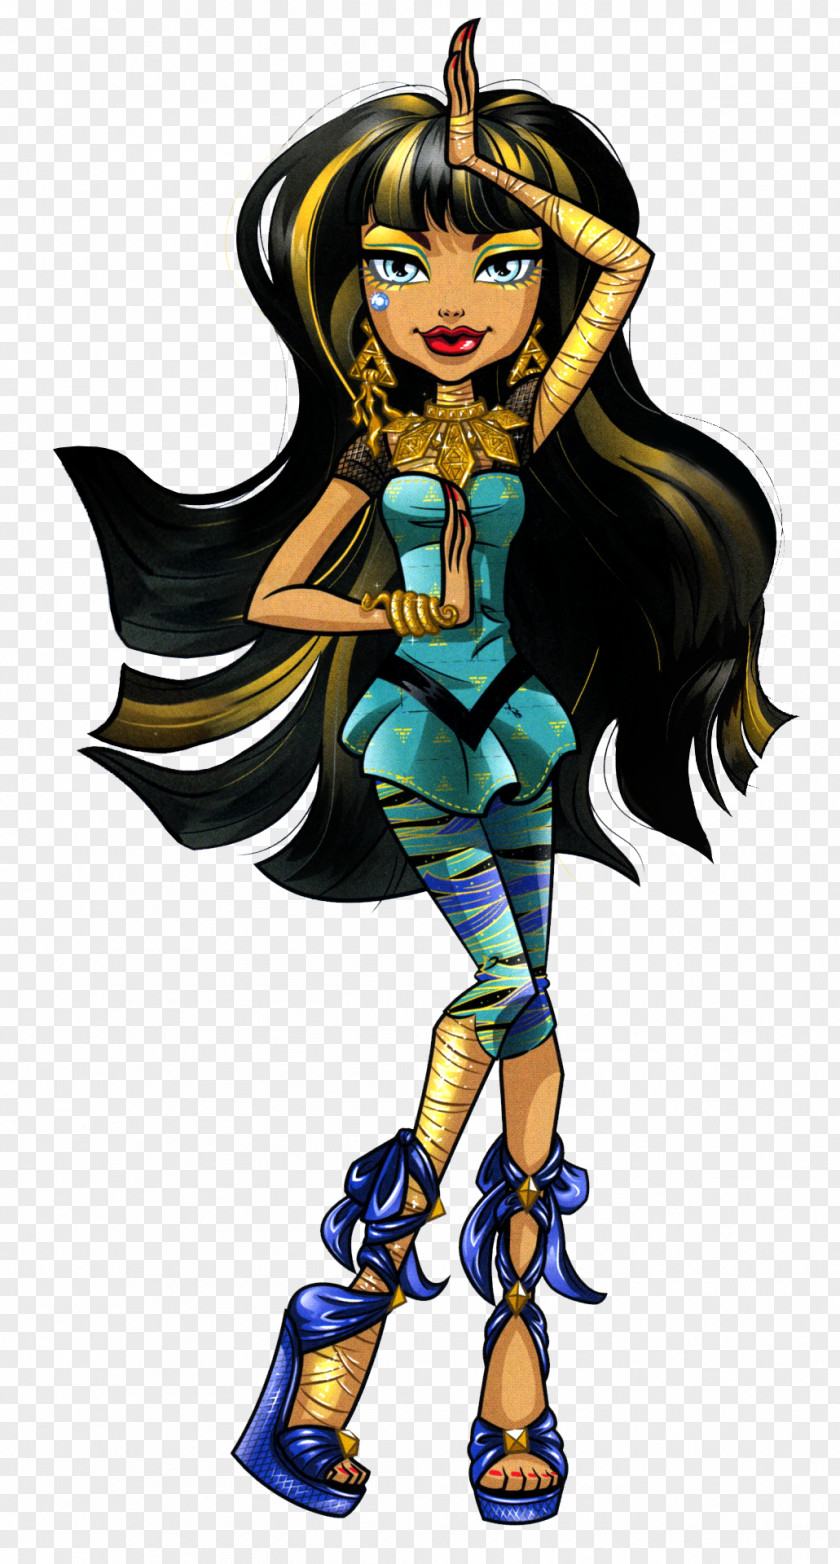 Monstera Monster High Art Frankie Stein Doll Toy PNG